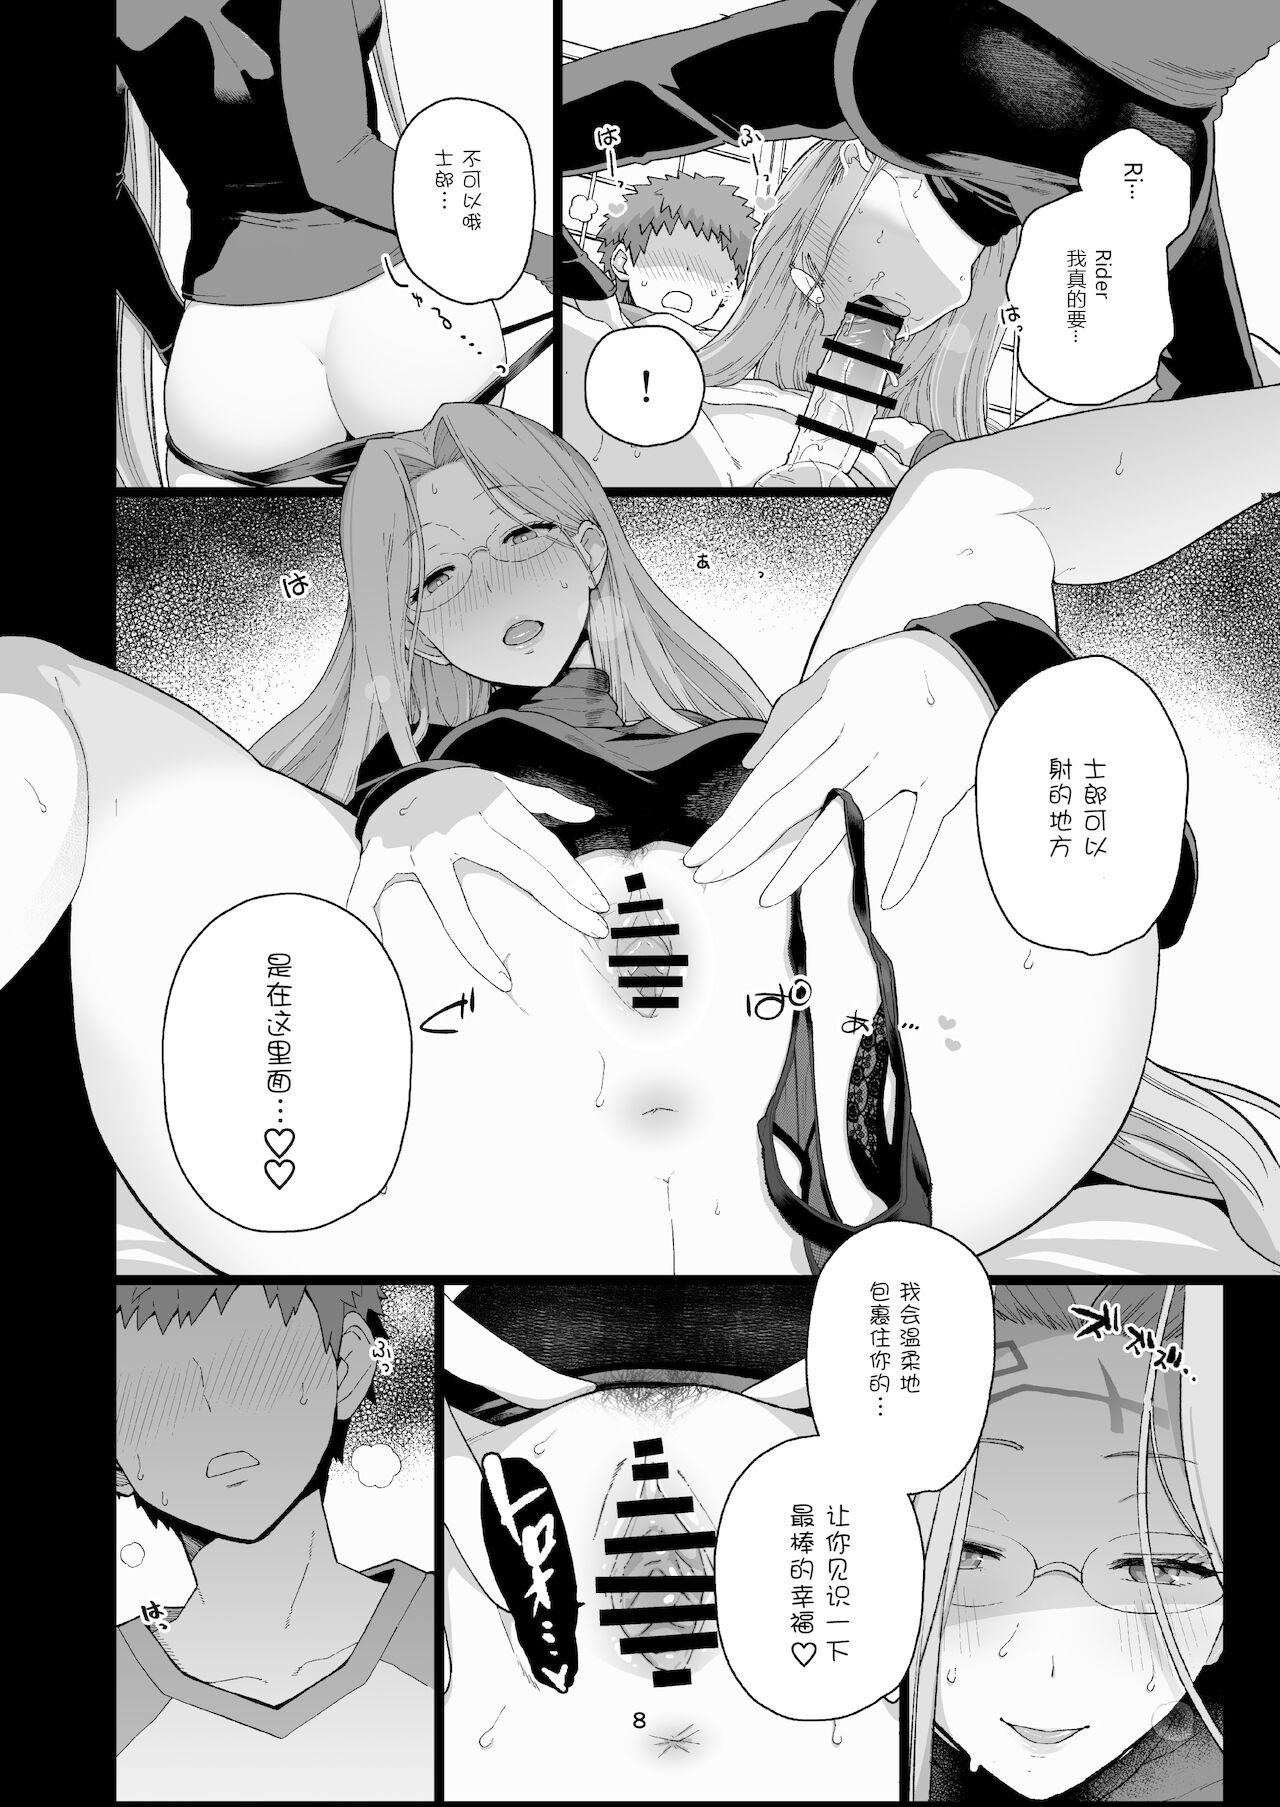 This Rider-san no Tsumamigui - Fate stay night Family Roleplay - Page 10